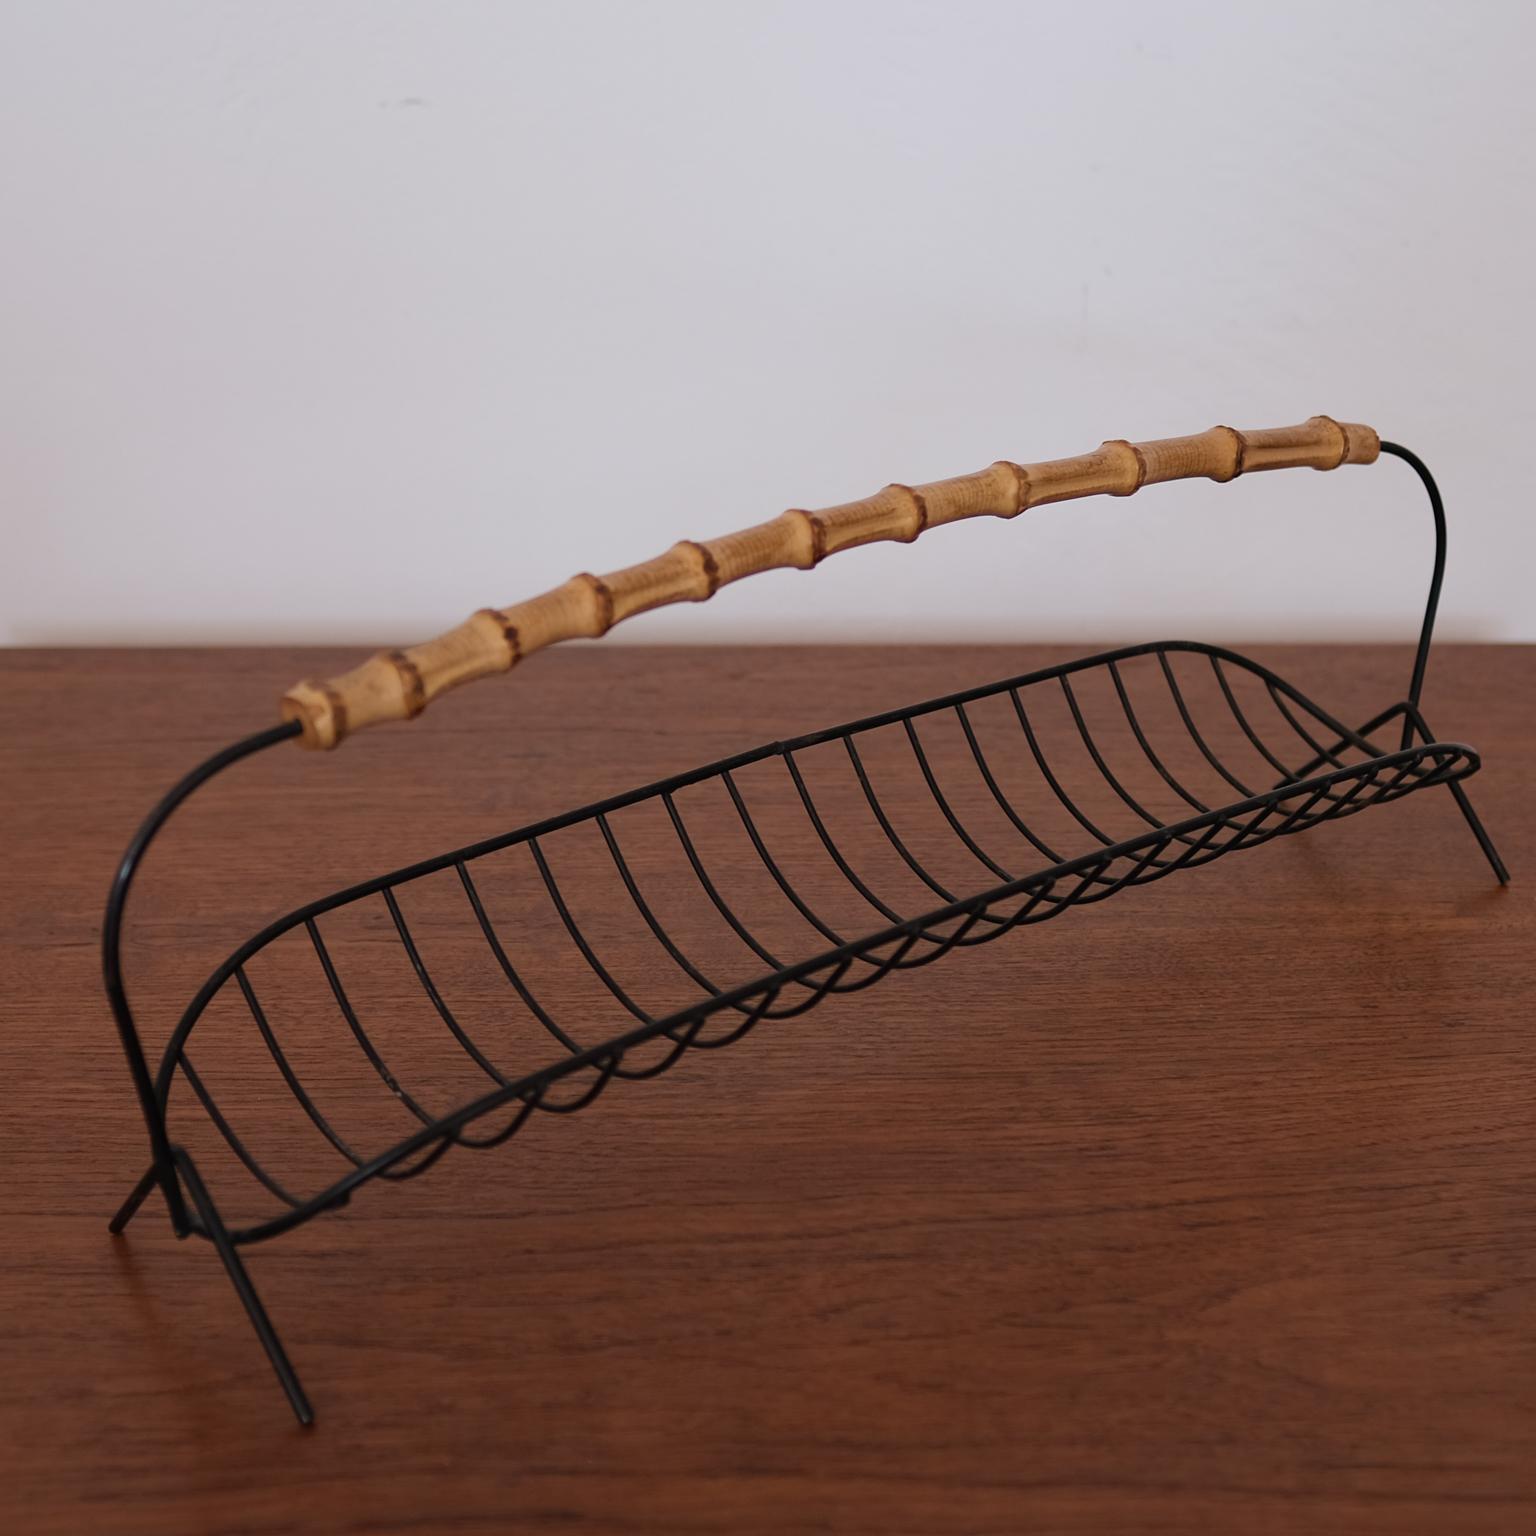 Mid-20th Century Wire Fruit Basket with Cane Handle, 1950s For Sale